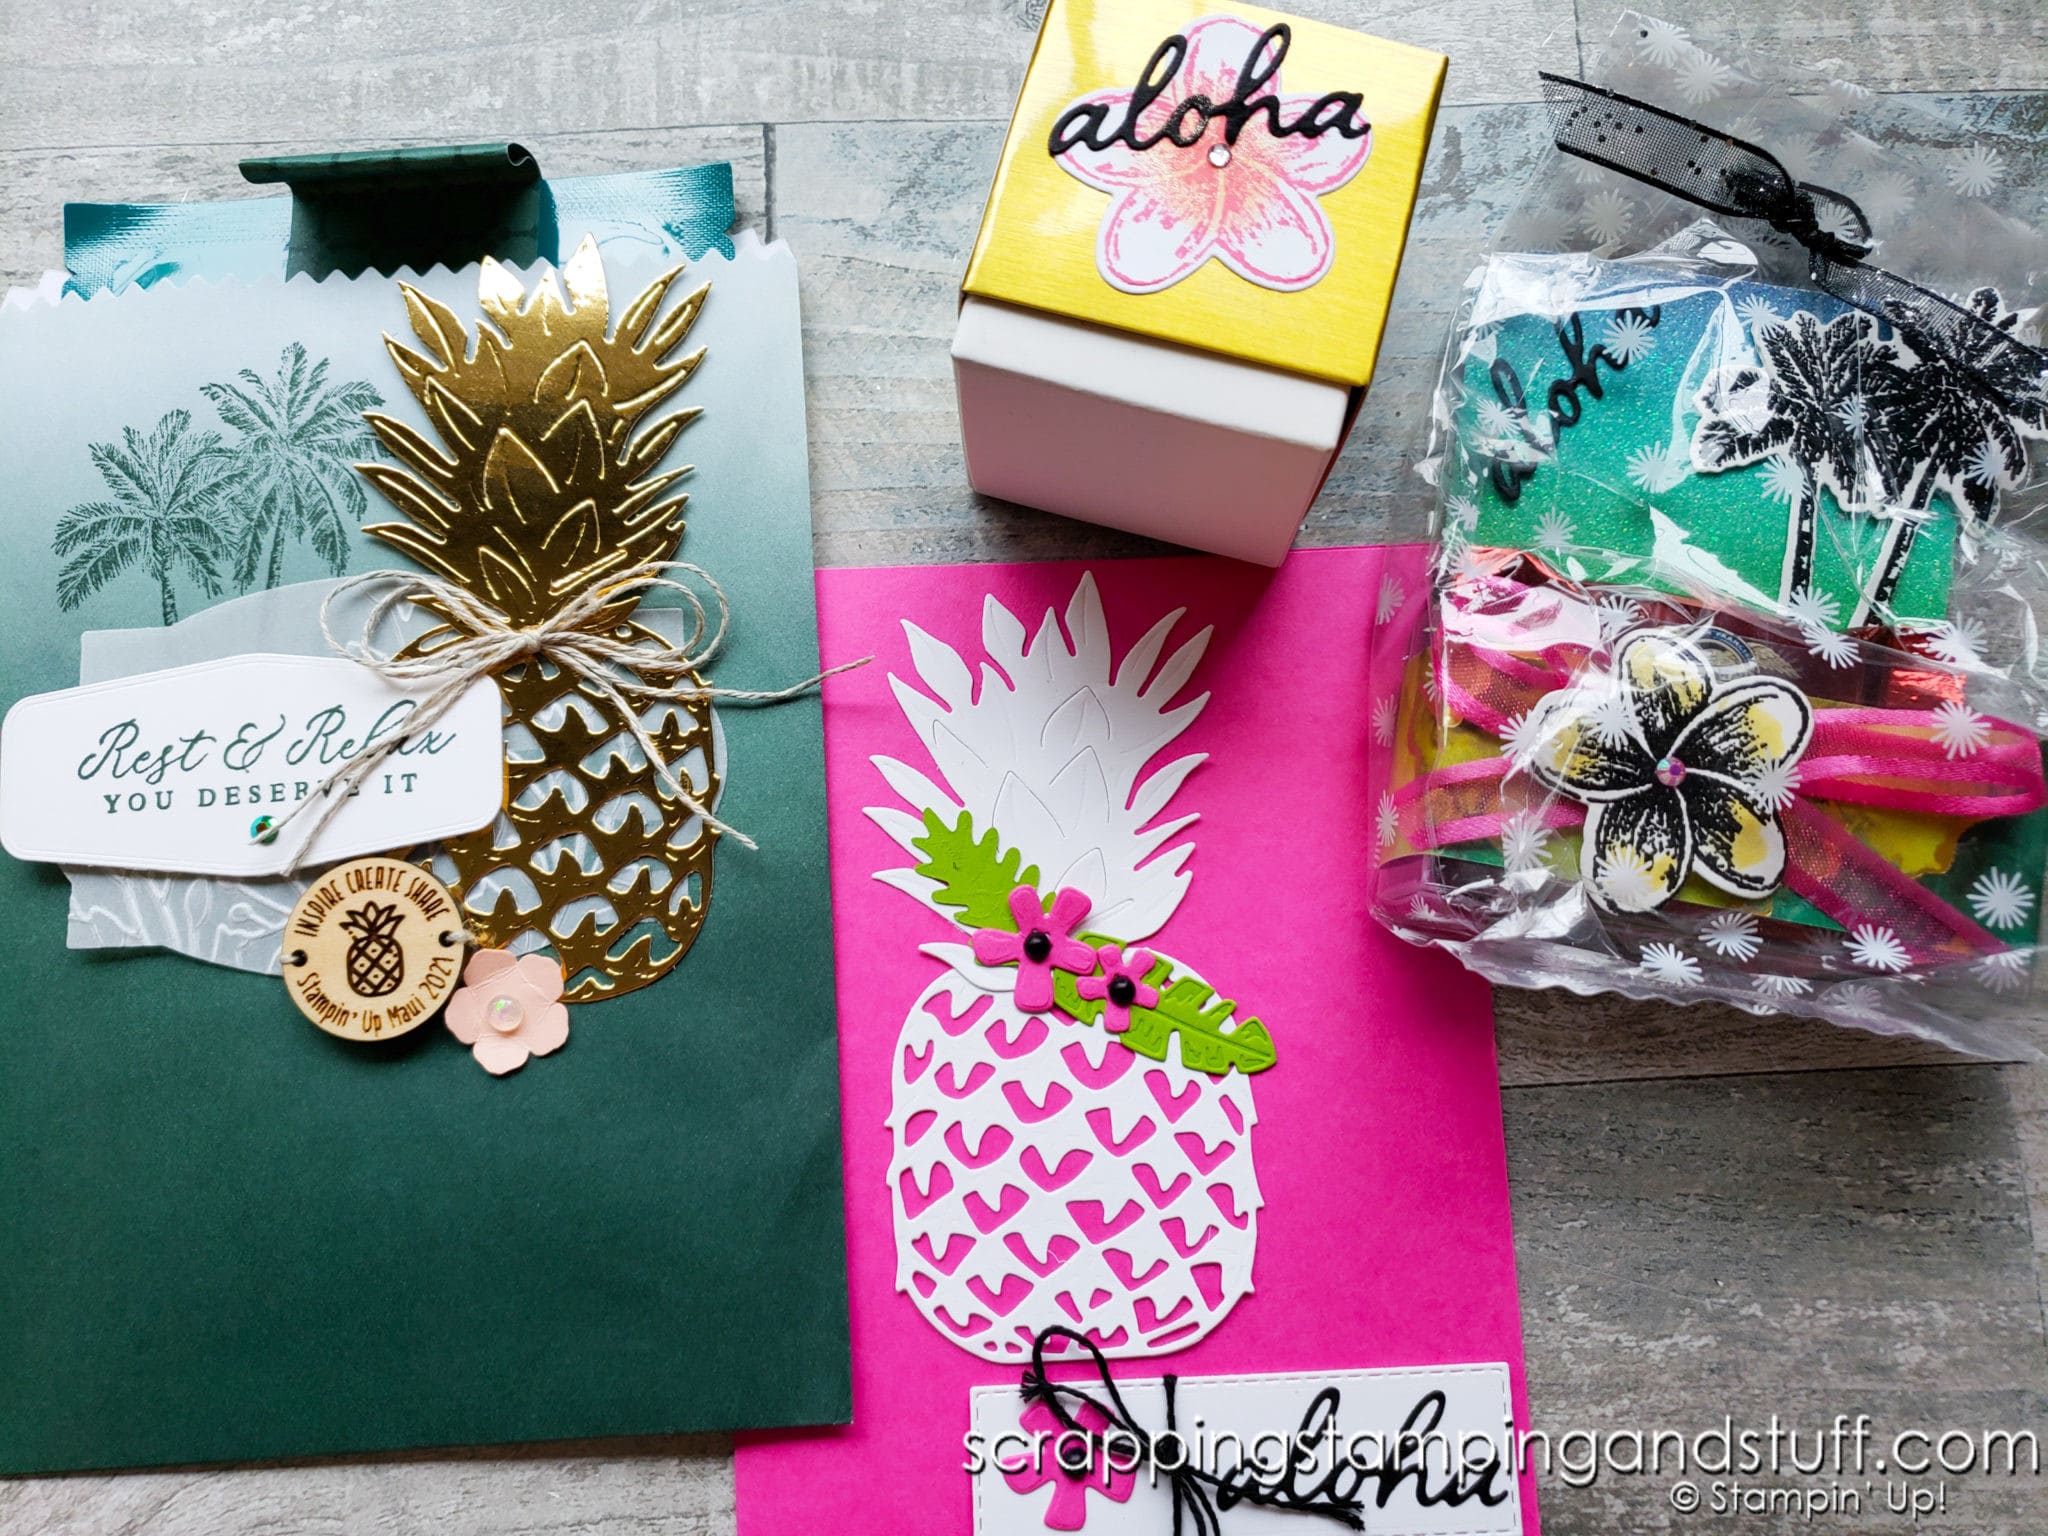 Take a look at these 52 amazing card and 3D paper project samples I received during the Stampin Up Maui Incentive Trip!